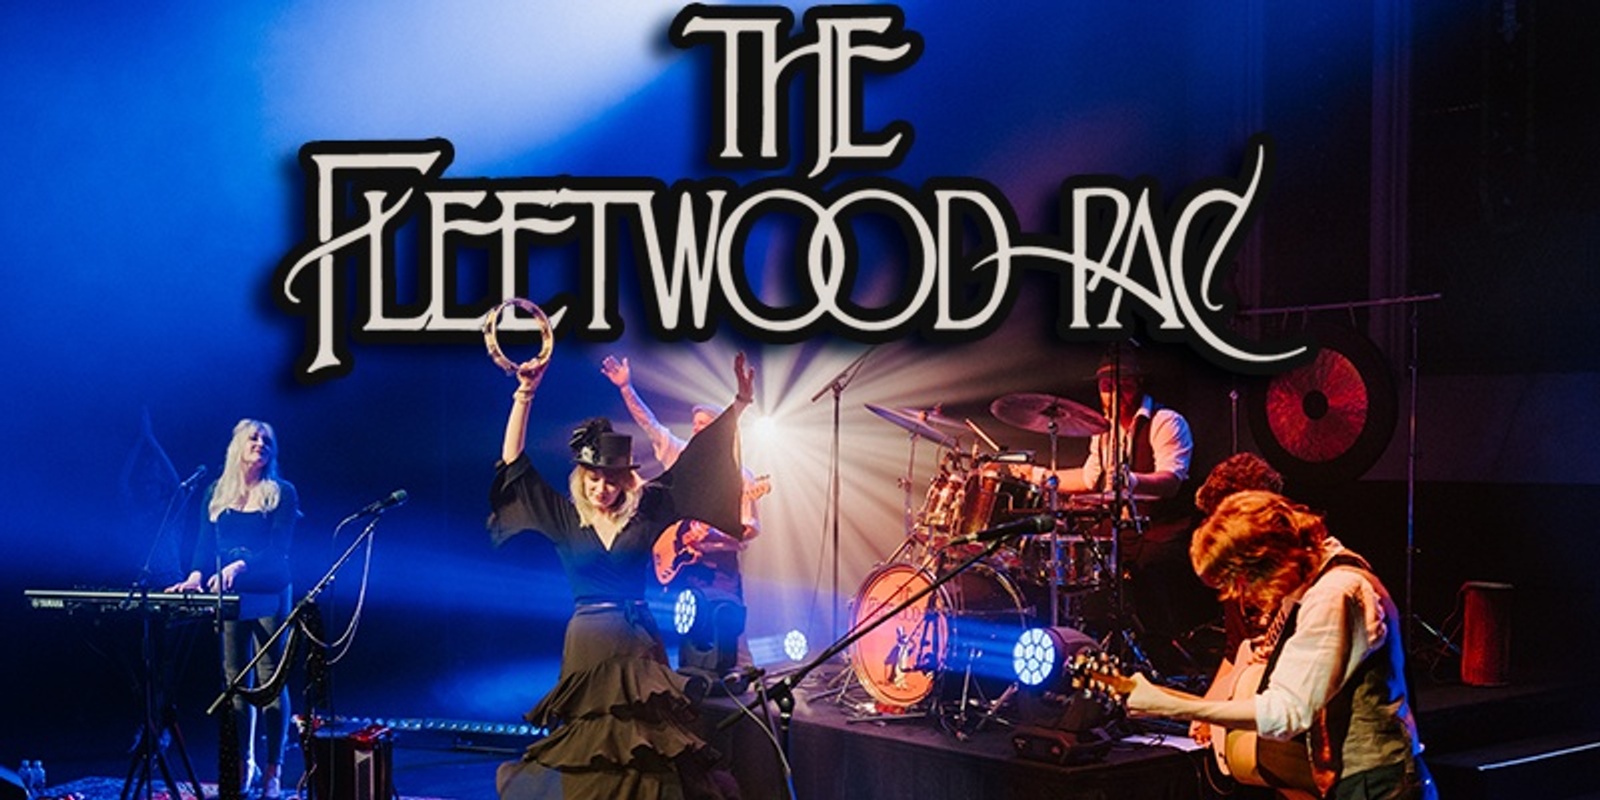 Banner image for The Fleetwood Pac